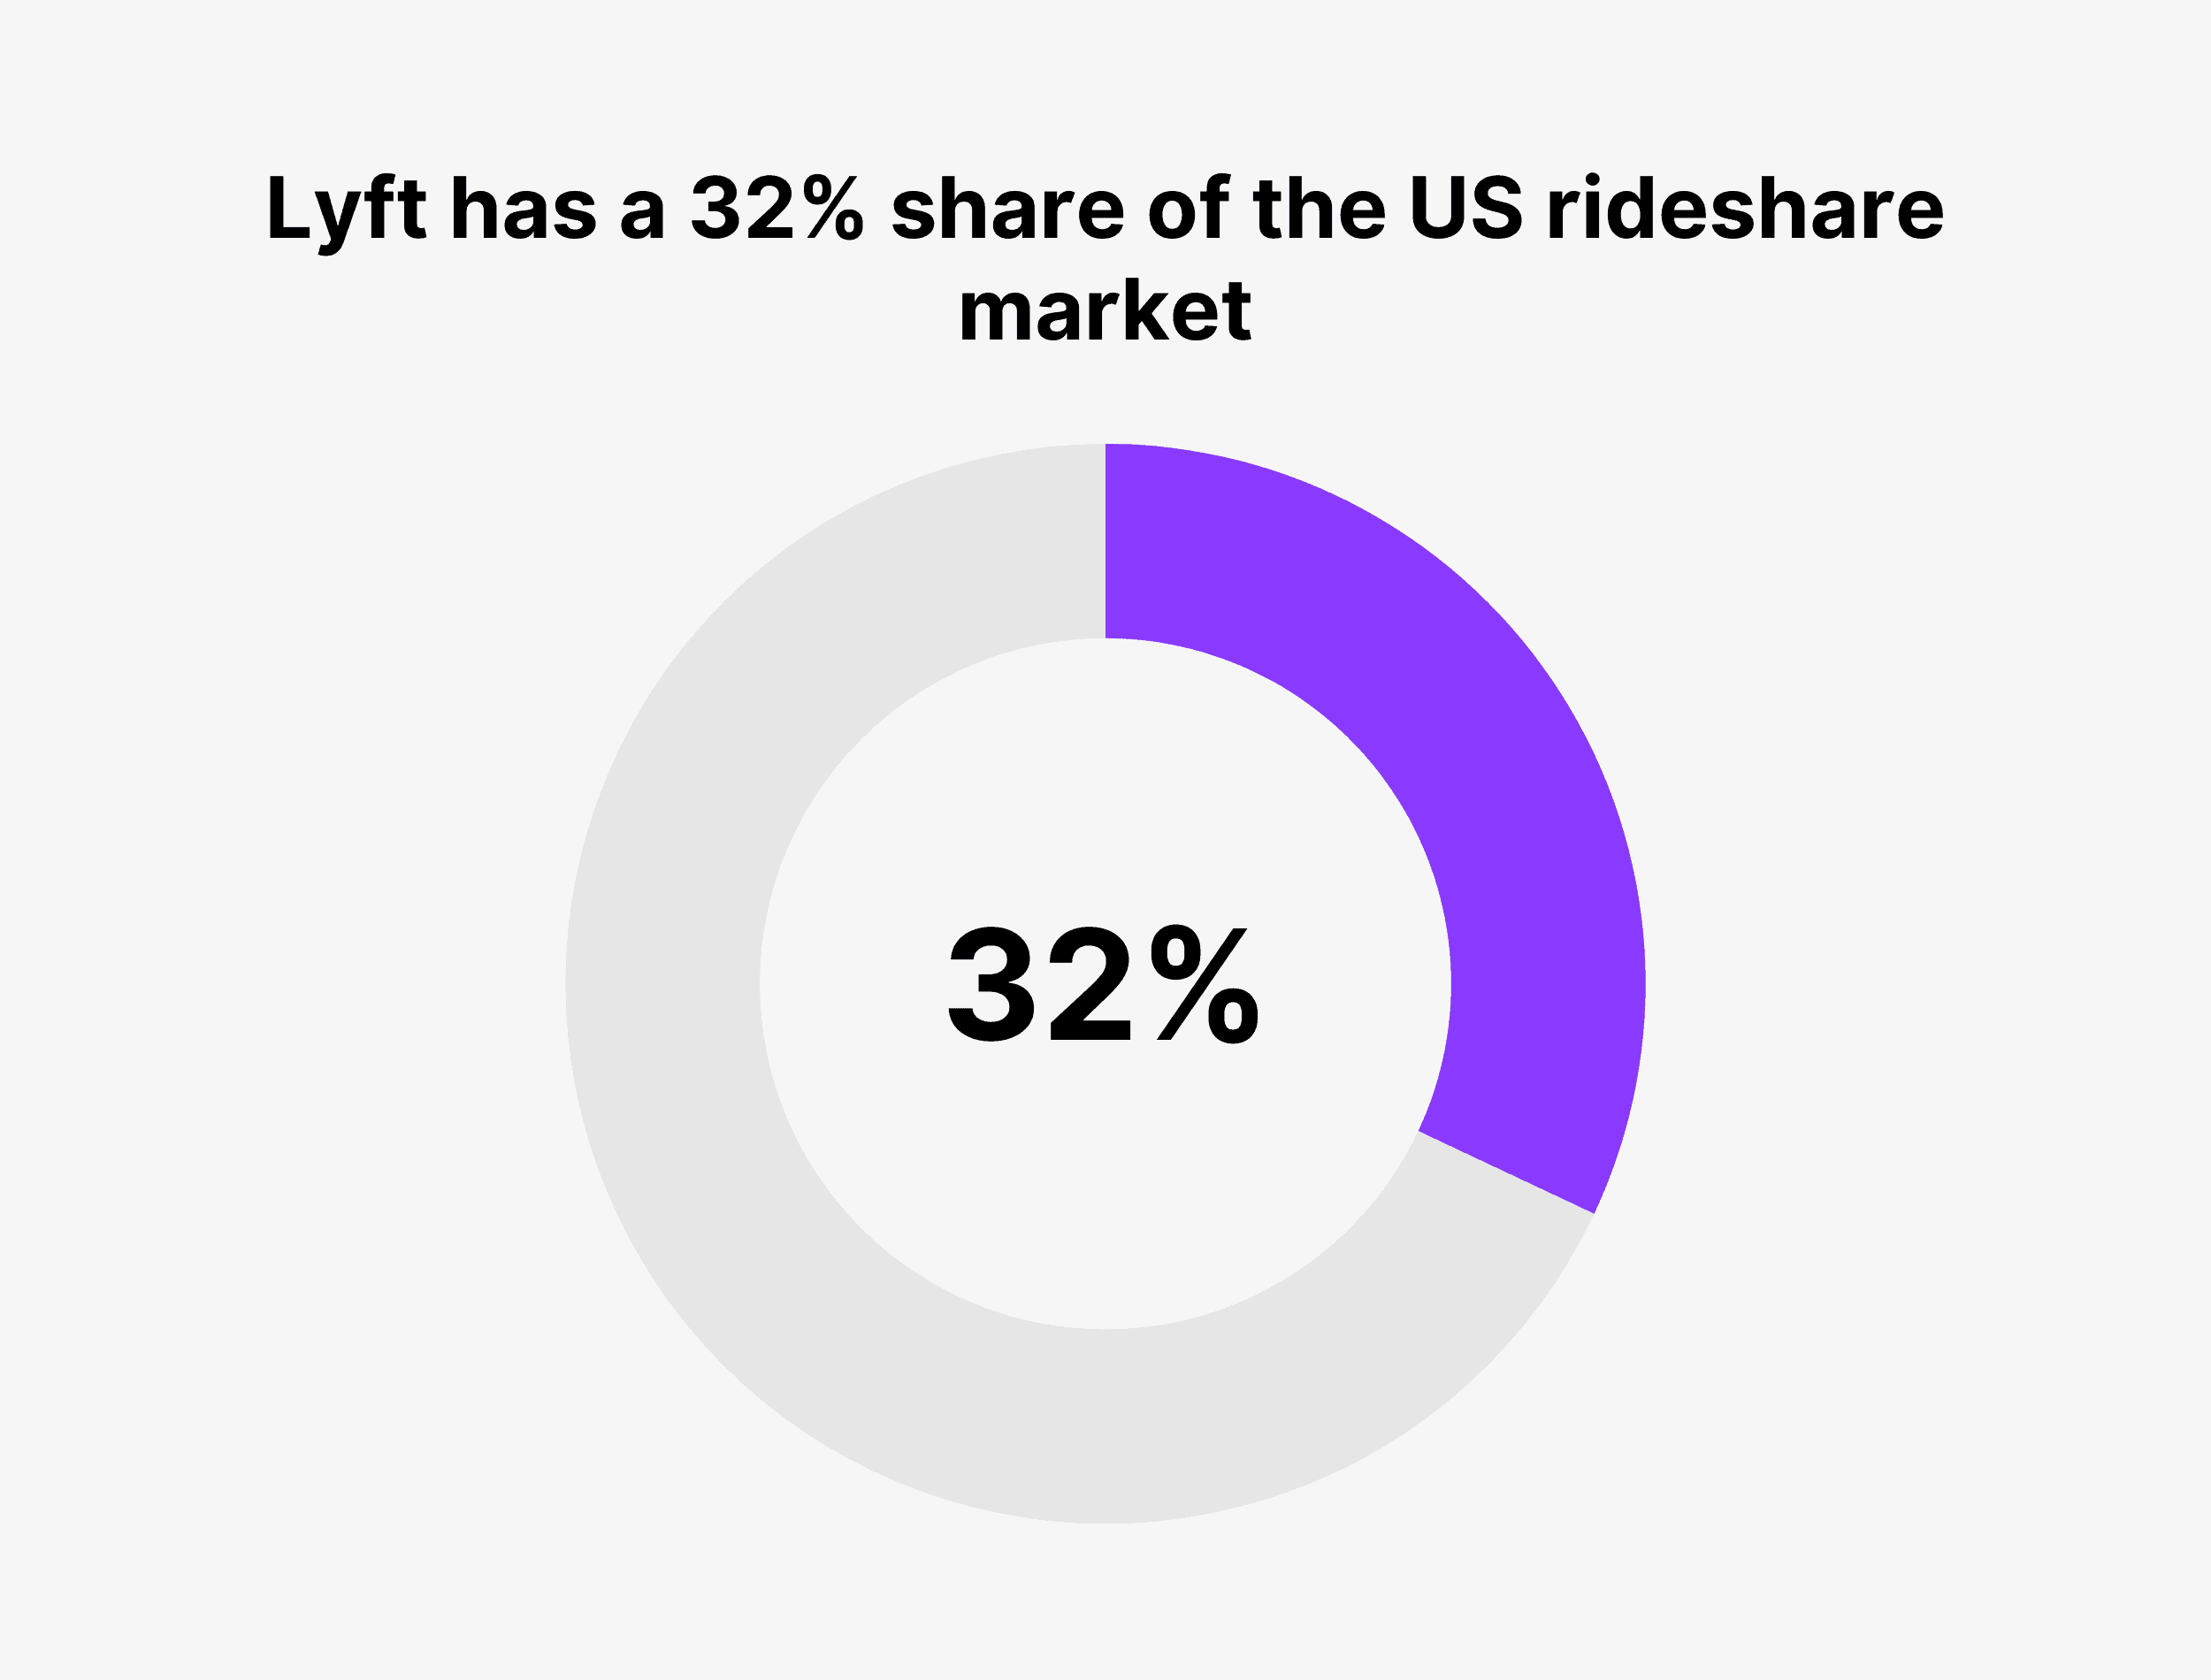 Lyft has a 32% share of the US rideshare market